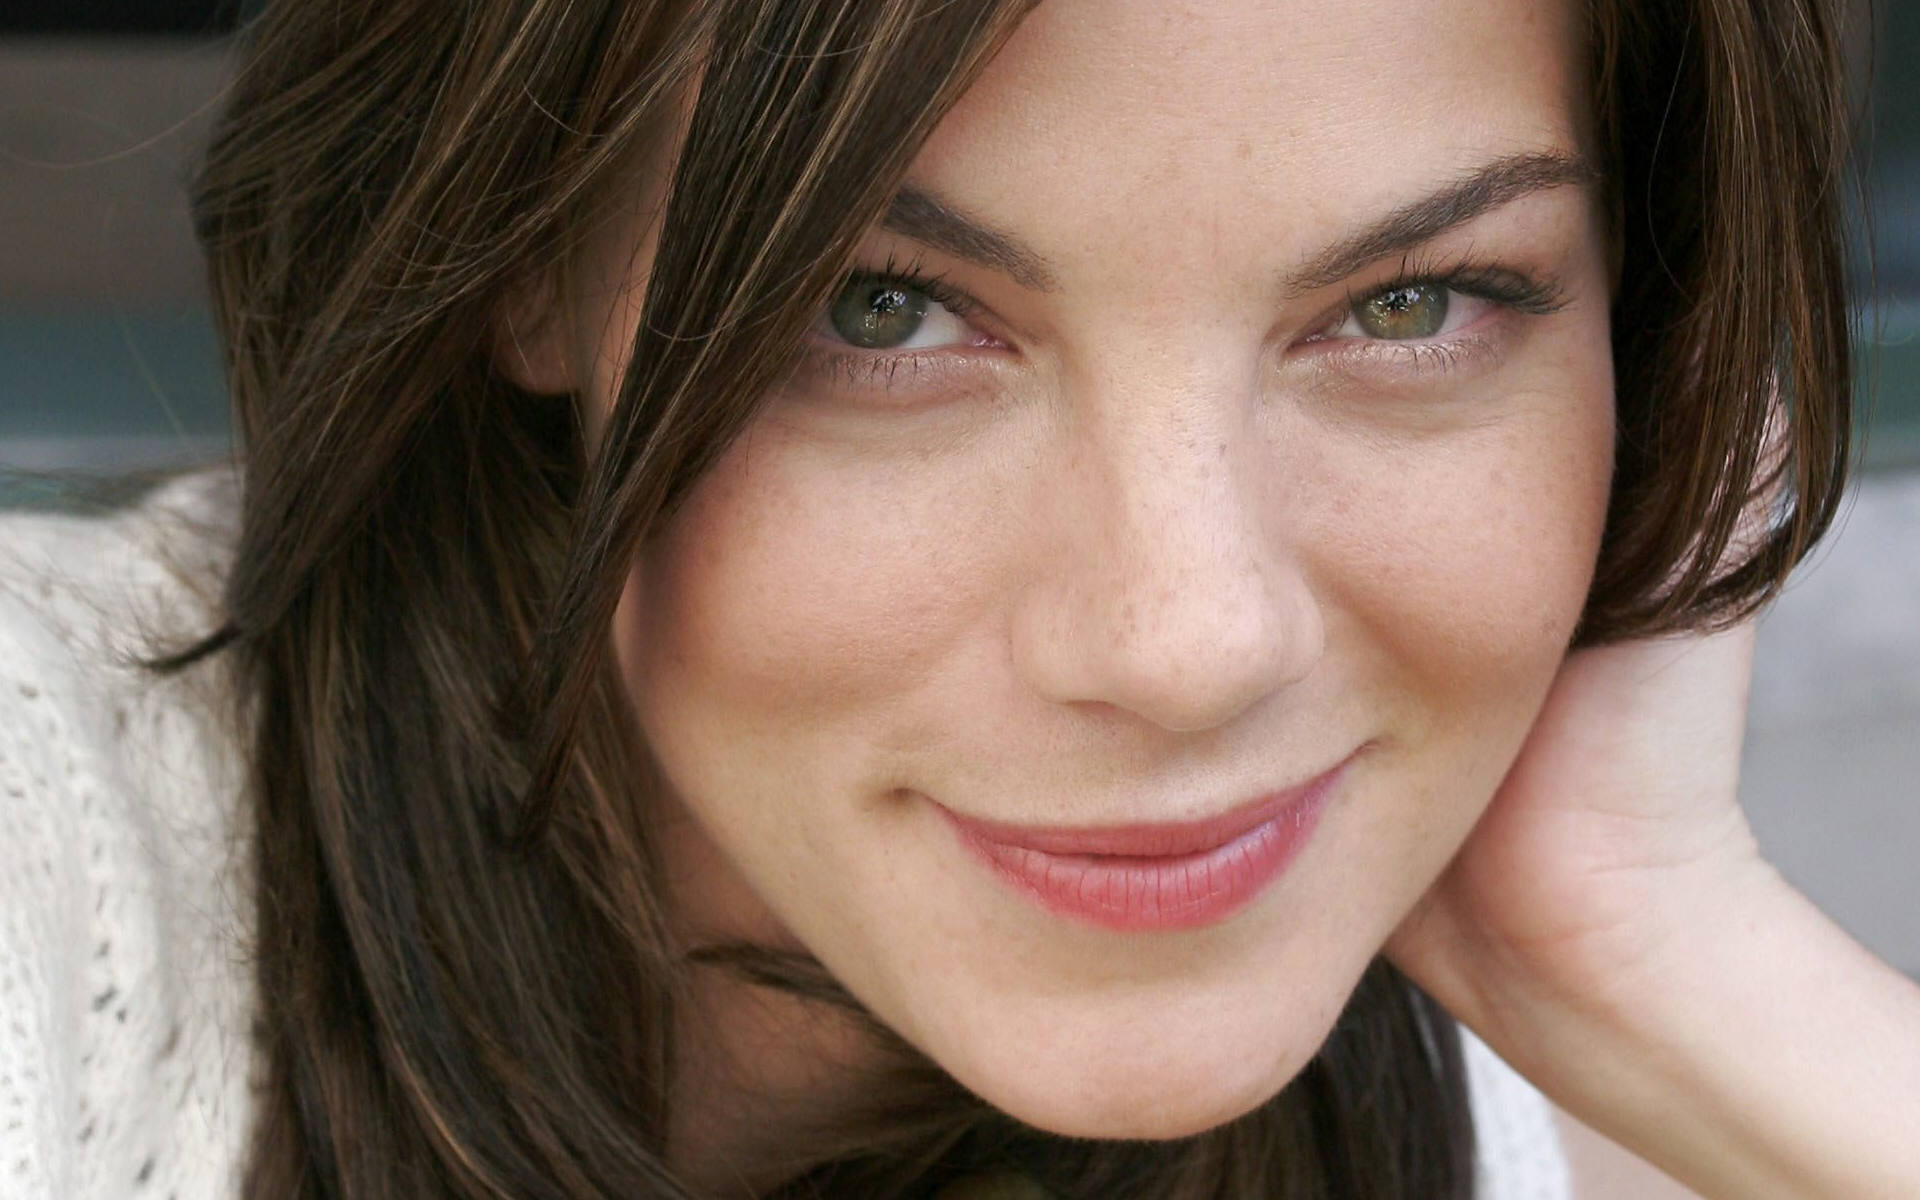 Celebrity Michelle Monaghan HD Wallpaper | Background Image